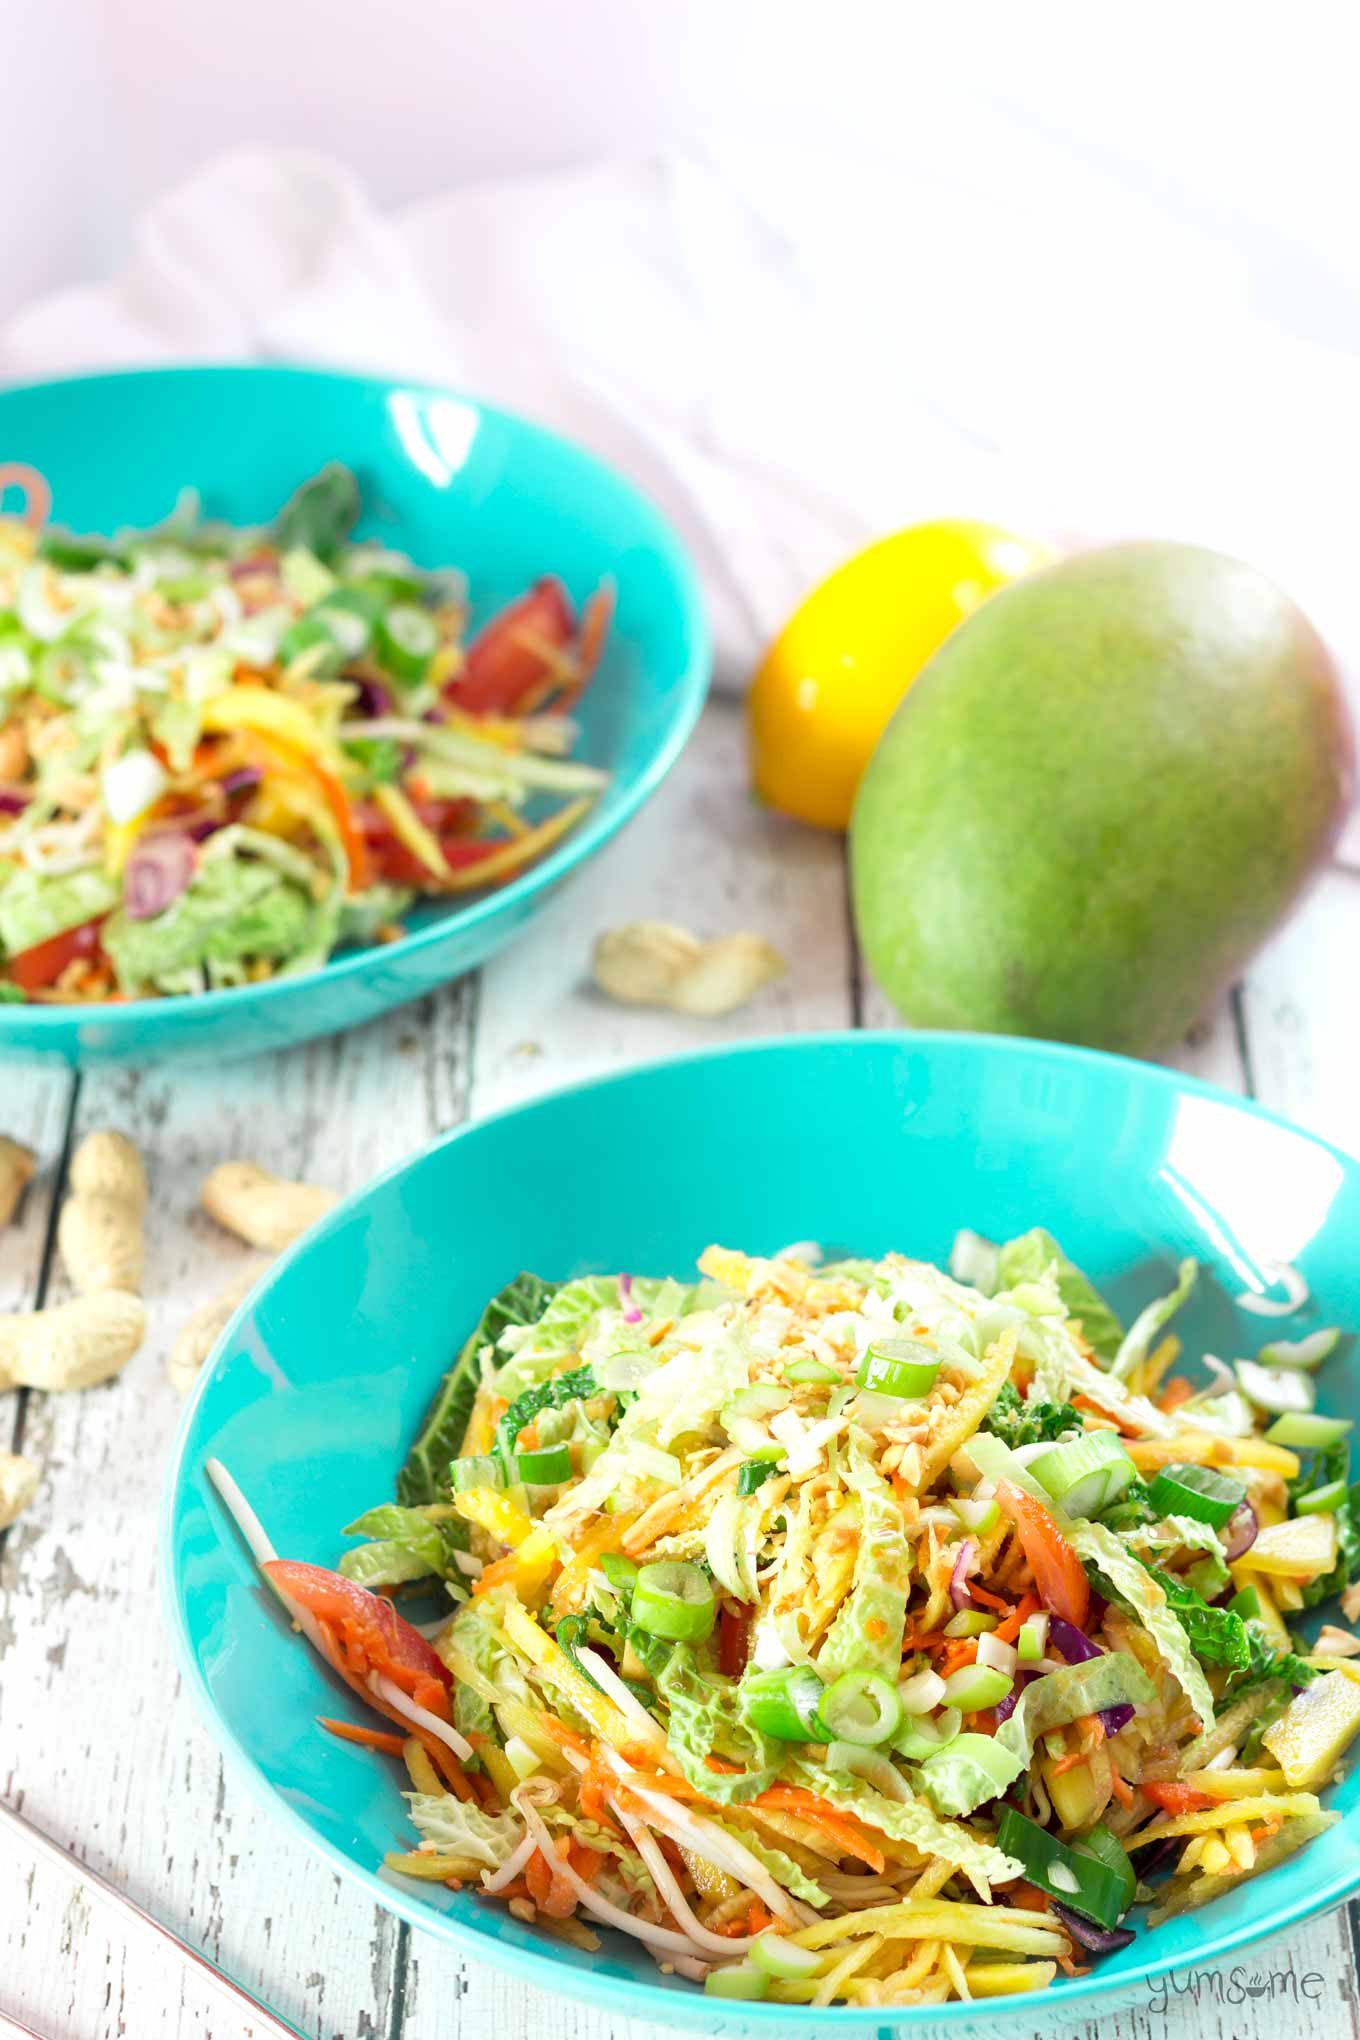 Ready in 20 mins, vegan som tam is a simple, delicious Thai salad made with crunchy vegetables dressed in a fresh and zingy hot, sour, salty, sweet sauce. | yumsome.com